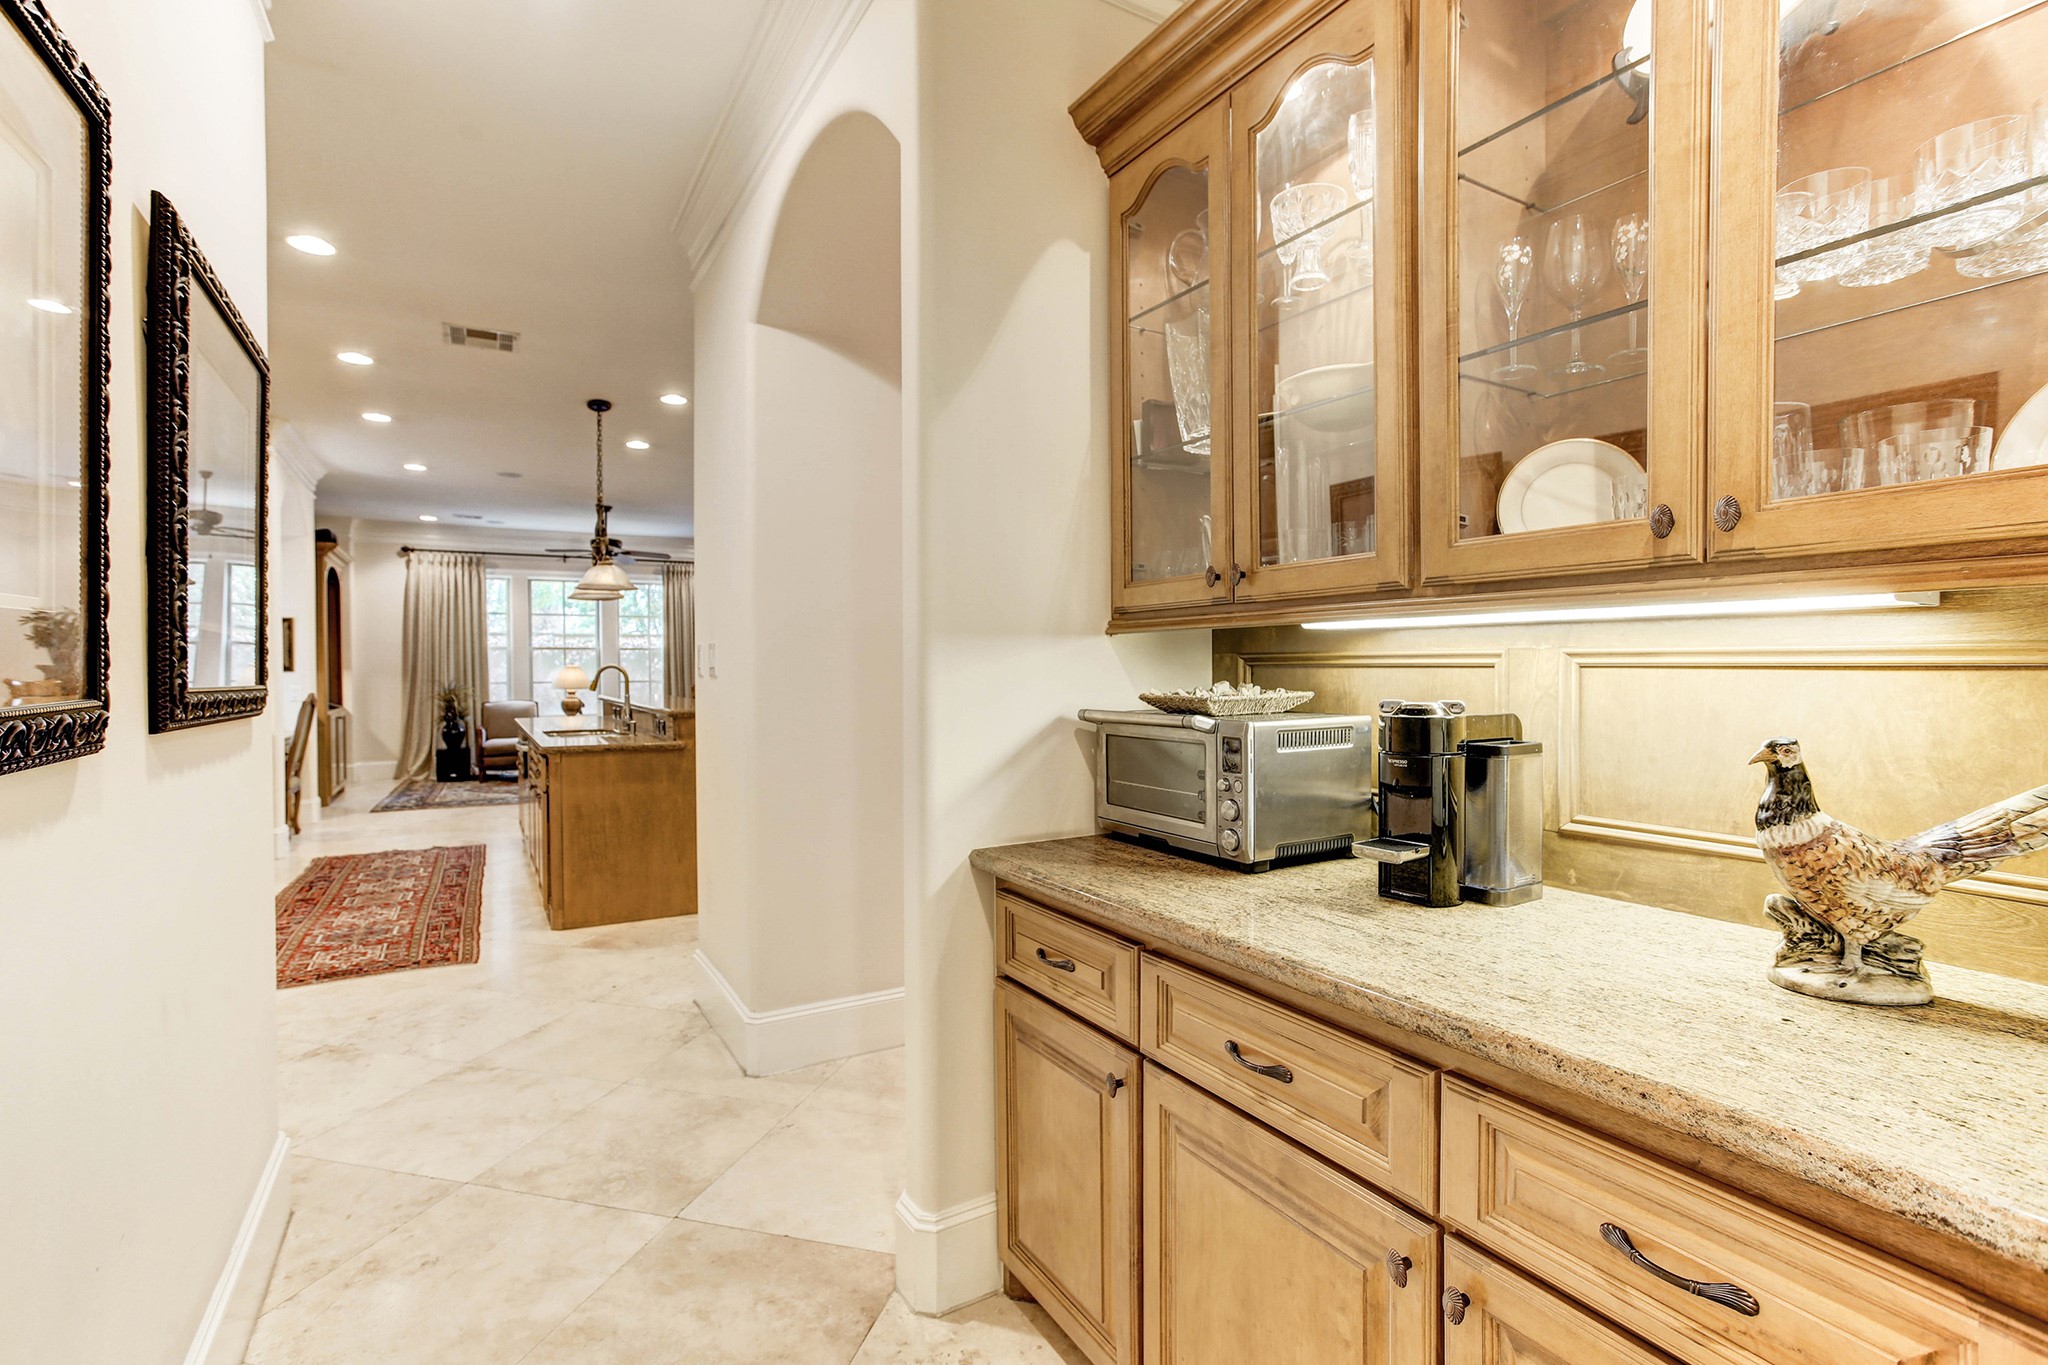 The Butlers pantry conveniently located beyond the Kitchen and very accessible to the dining room.  Lots of glass cabinet storage as well as counter storage.